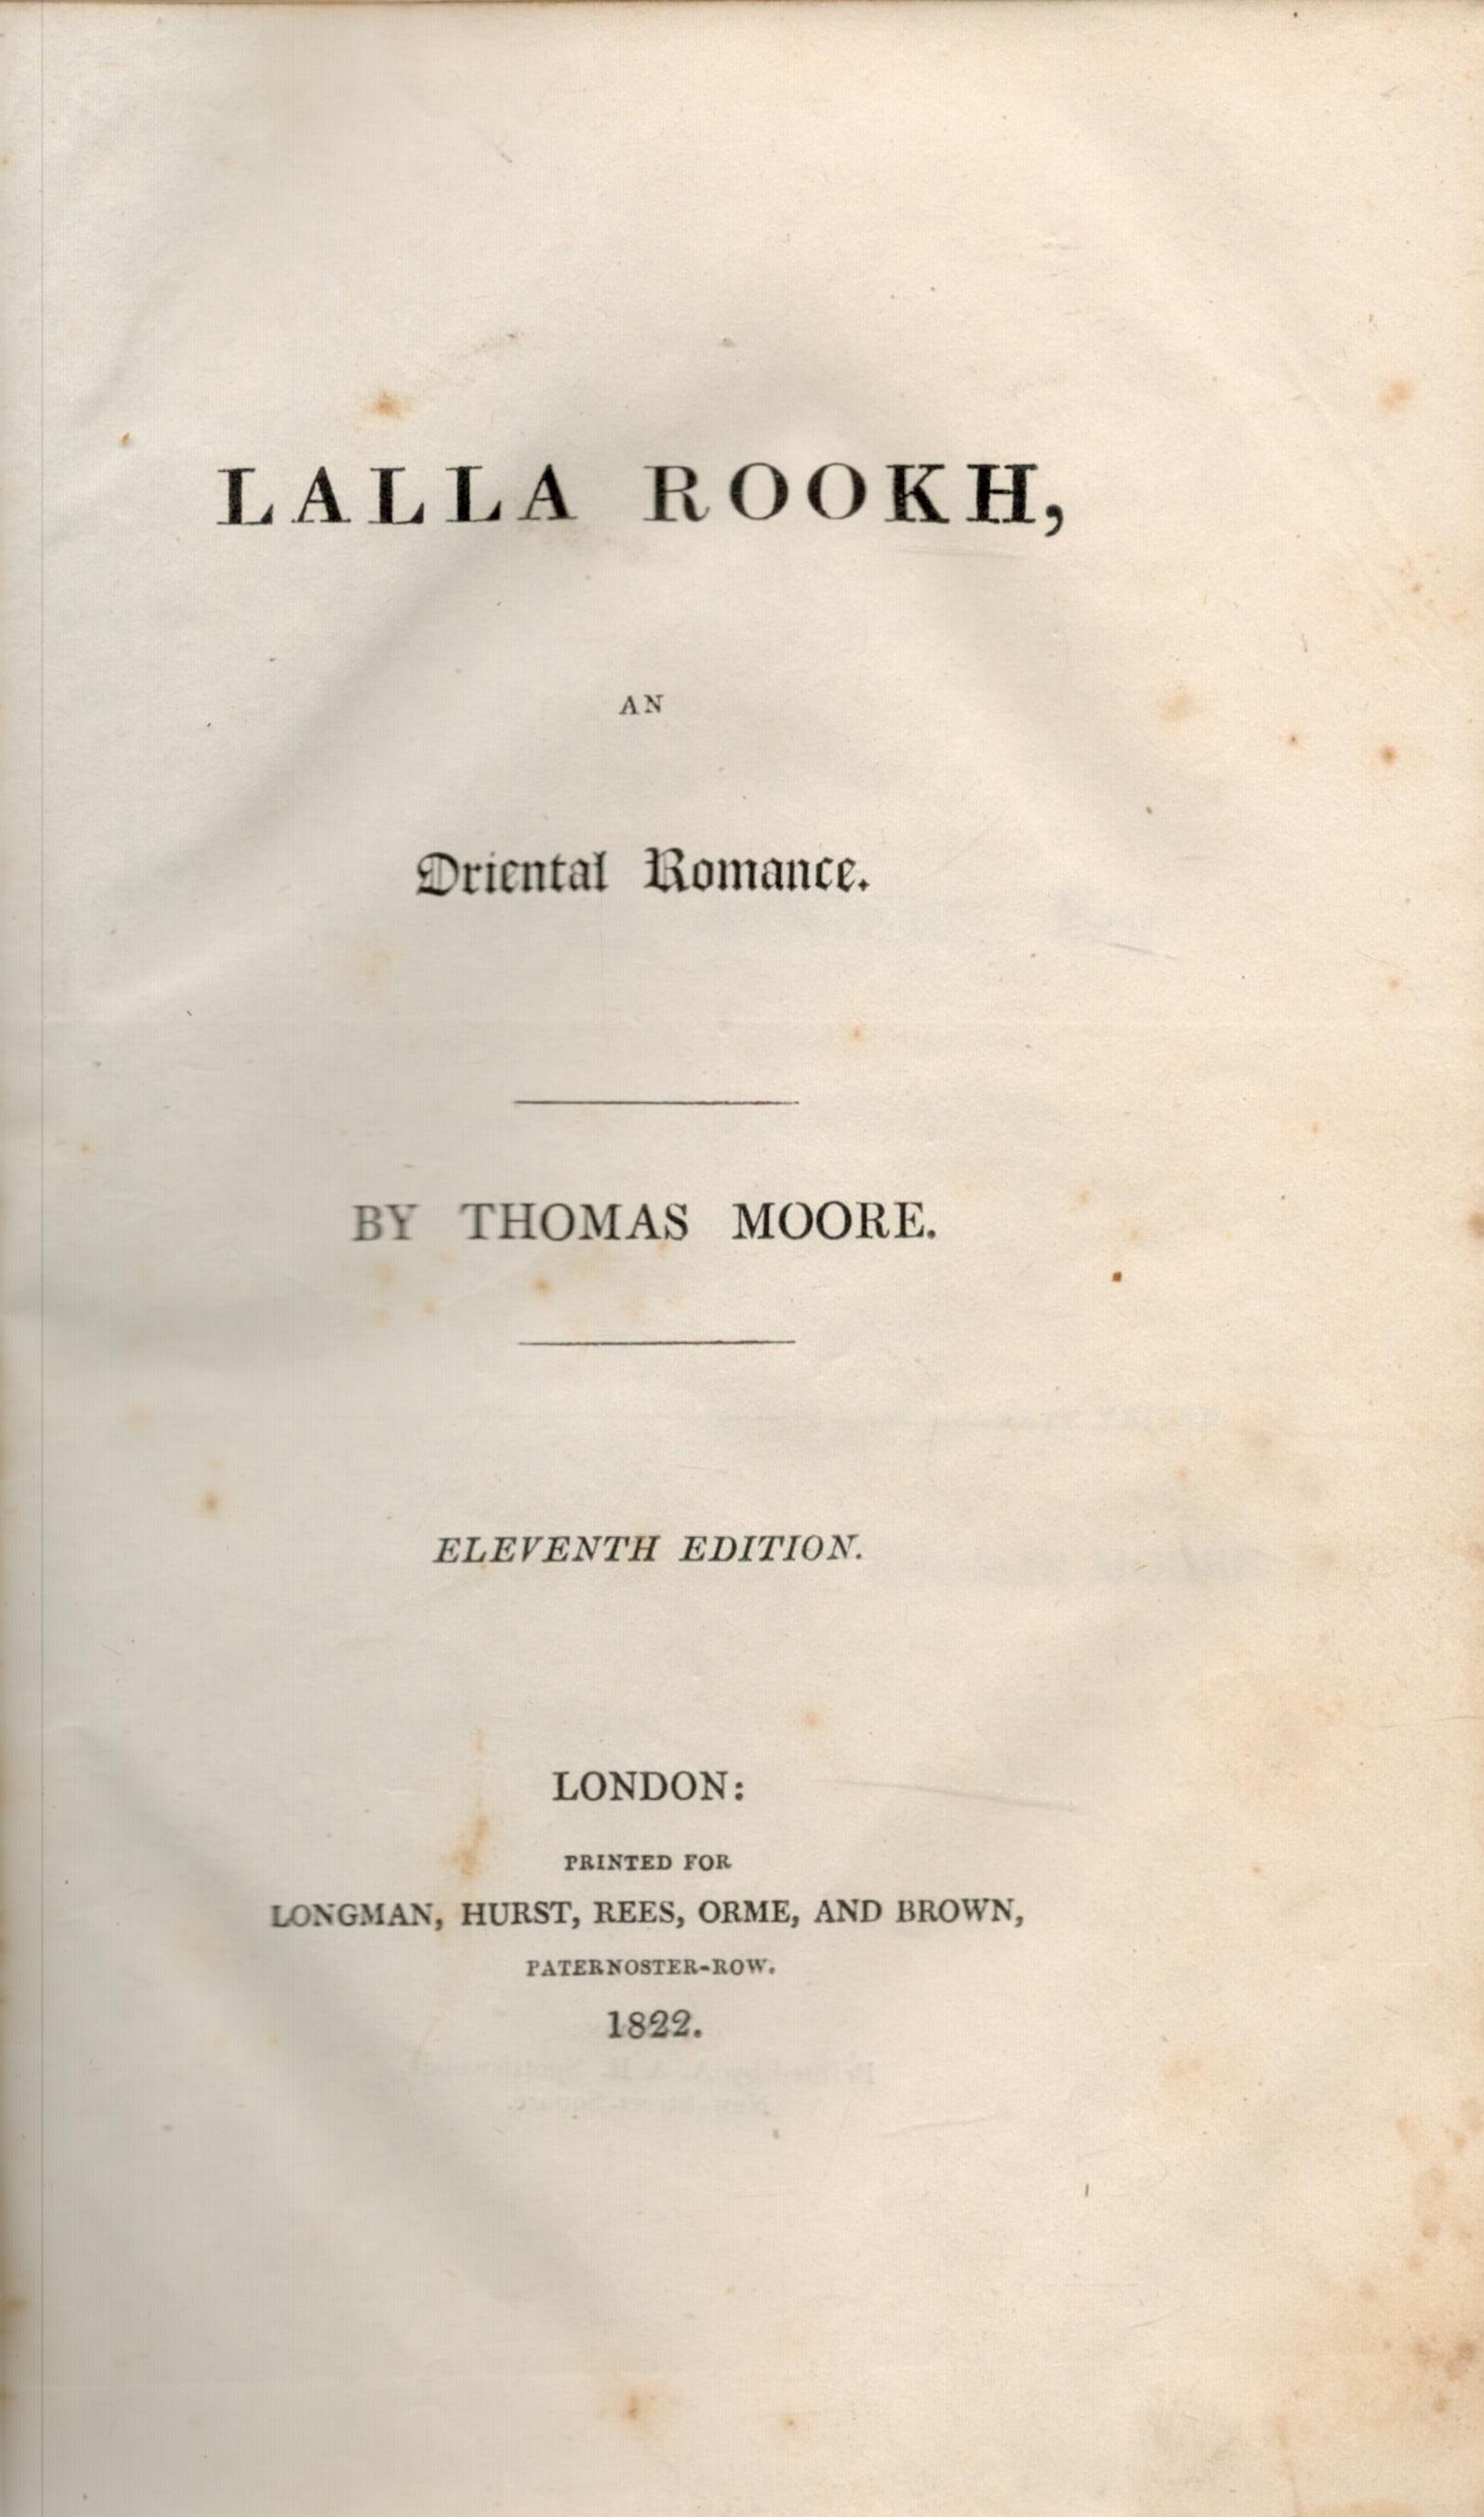 Lalla Book II An Oriental Romance by Thomas Moore 1822 Eleventh Edition Hardback Book with 397 pages - Image 2 of 2